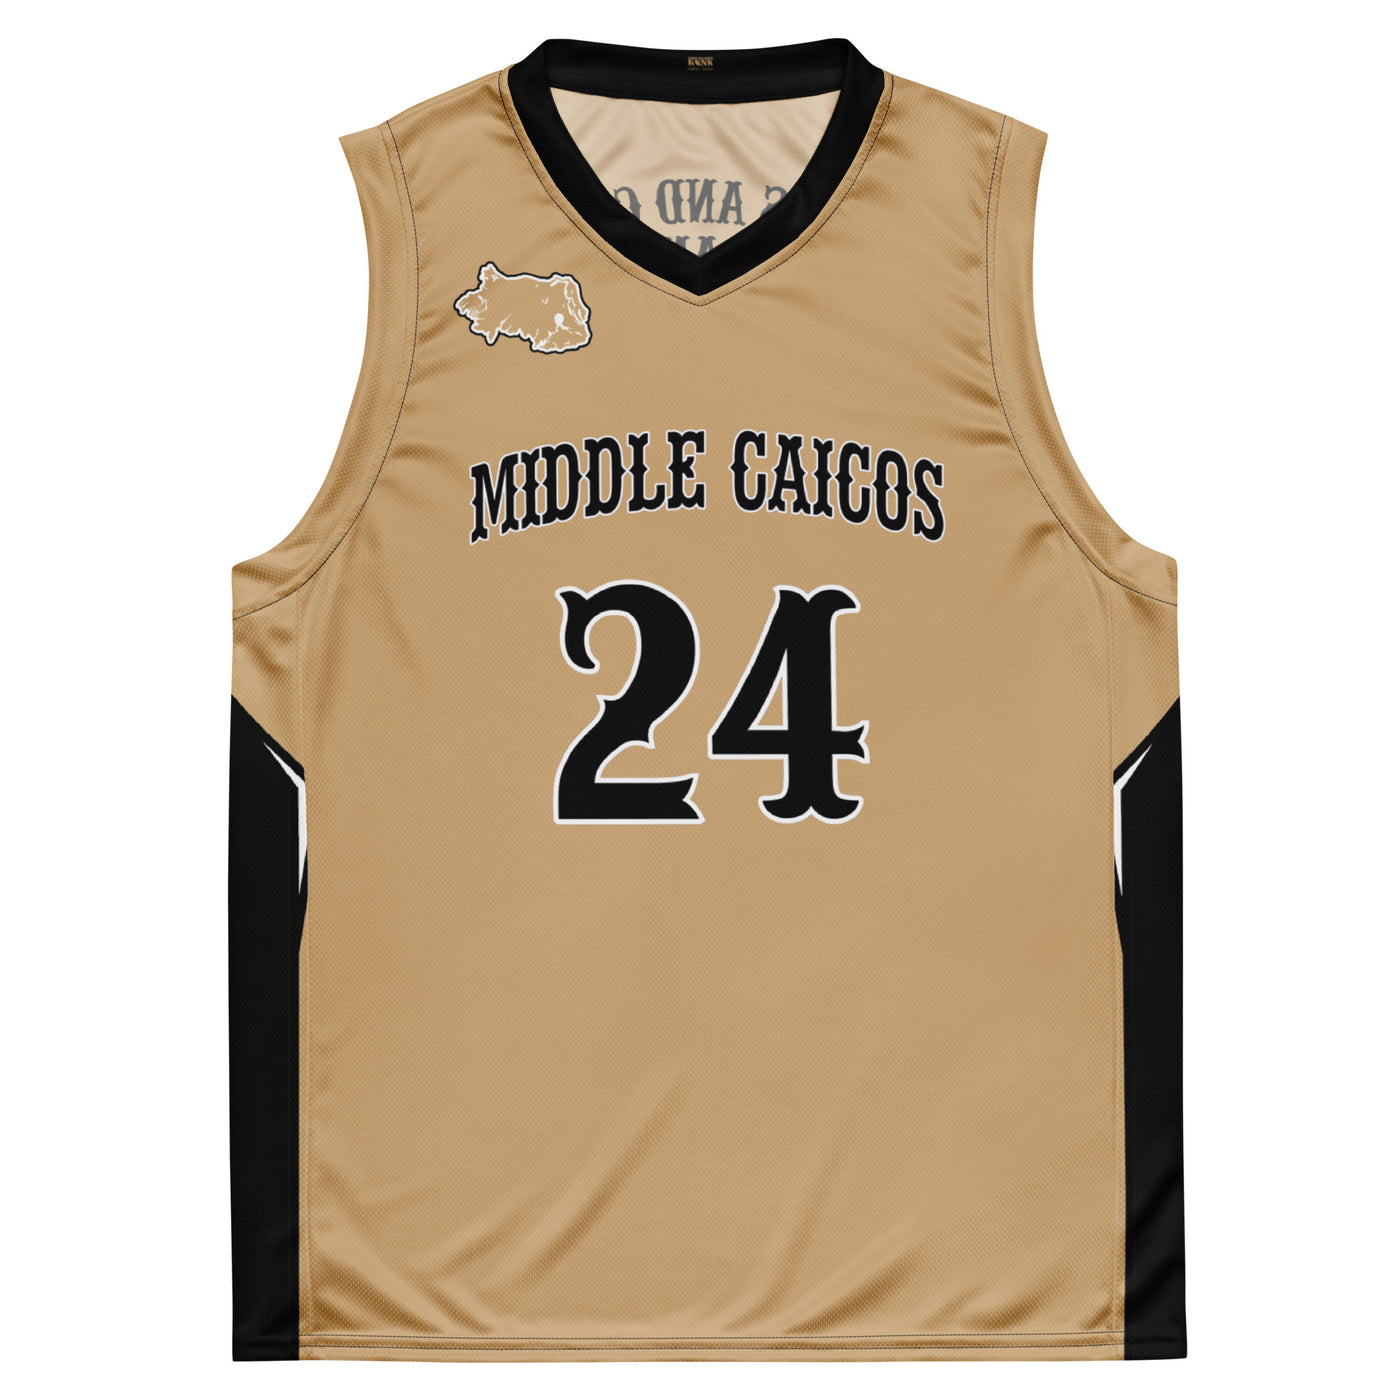 Middle Caicos Jersey